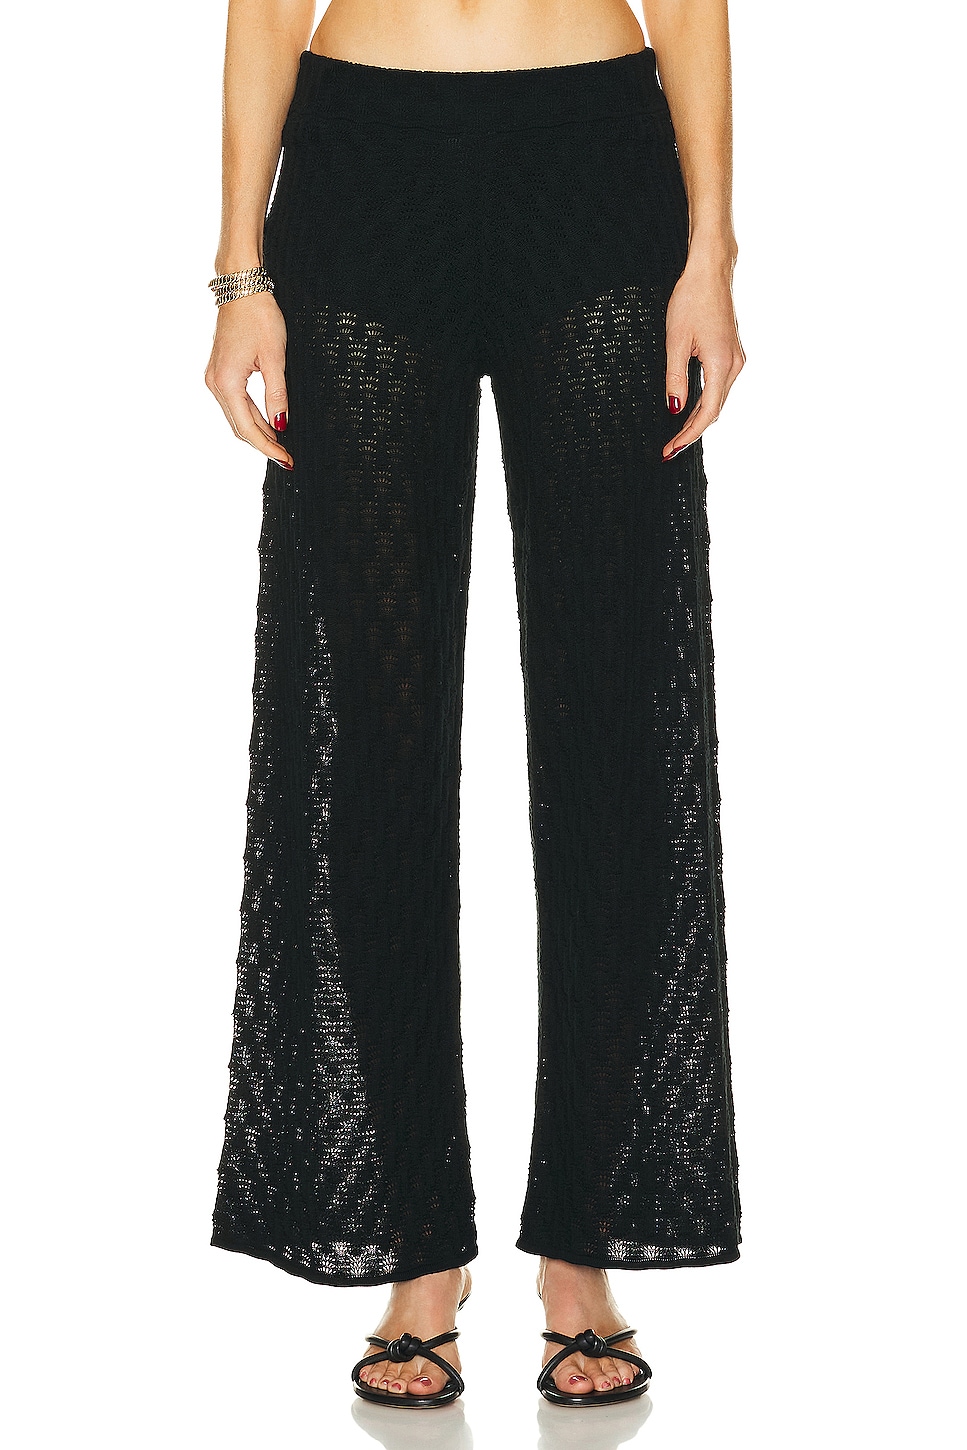 Image 1 of Cult Gaia Jayla Knit Pant in Black